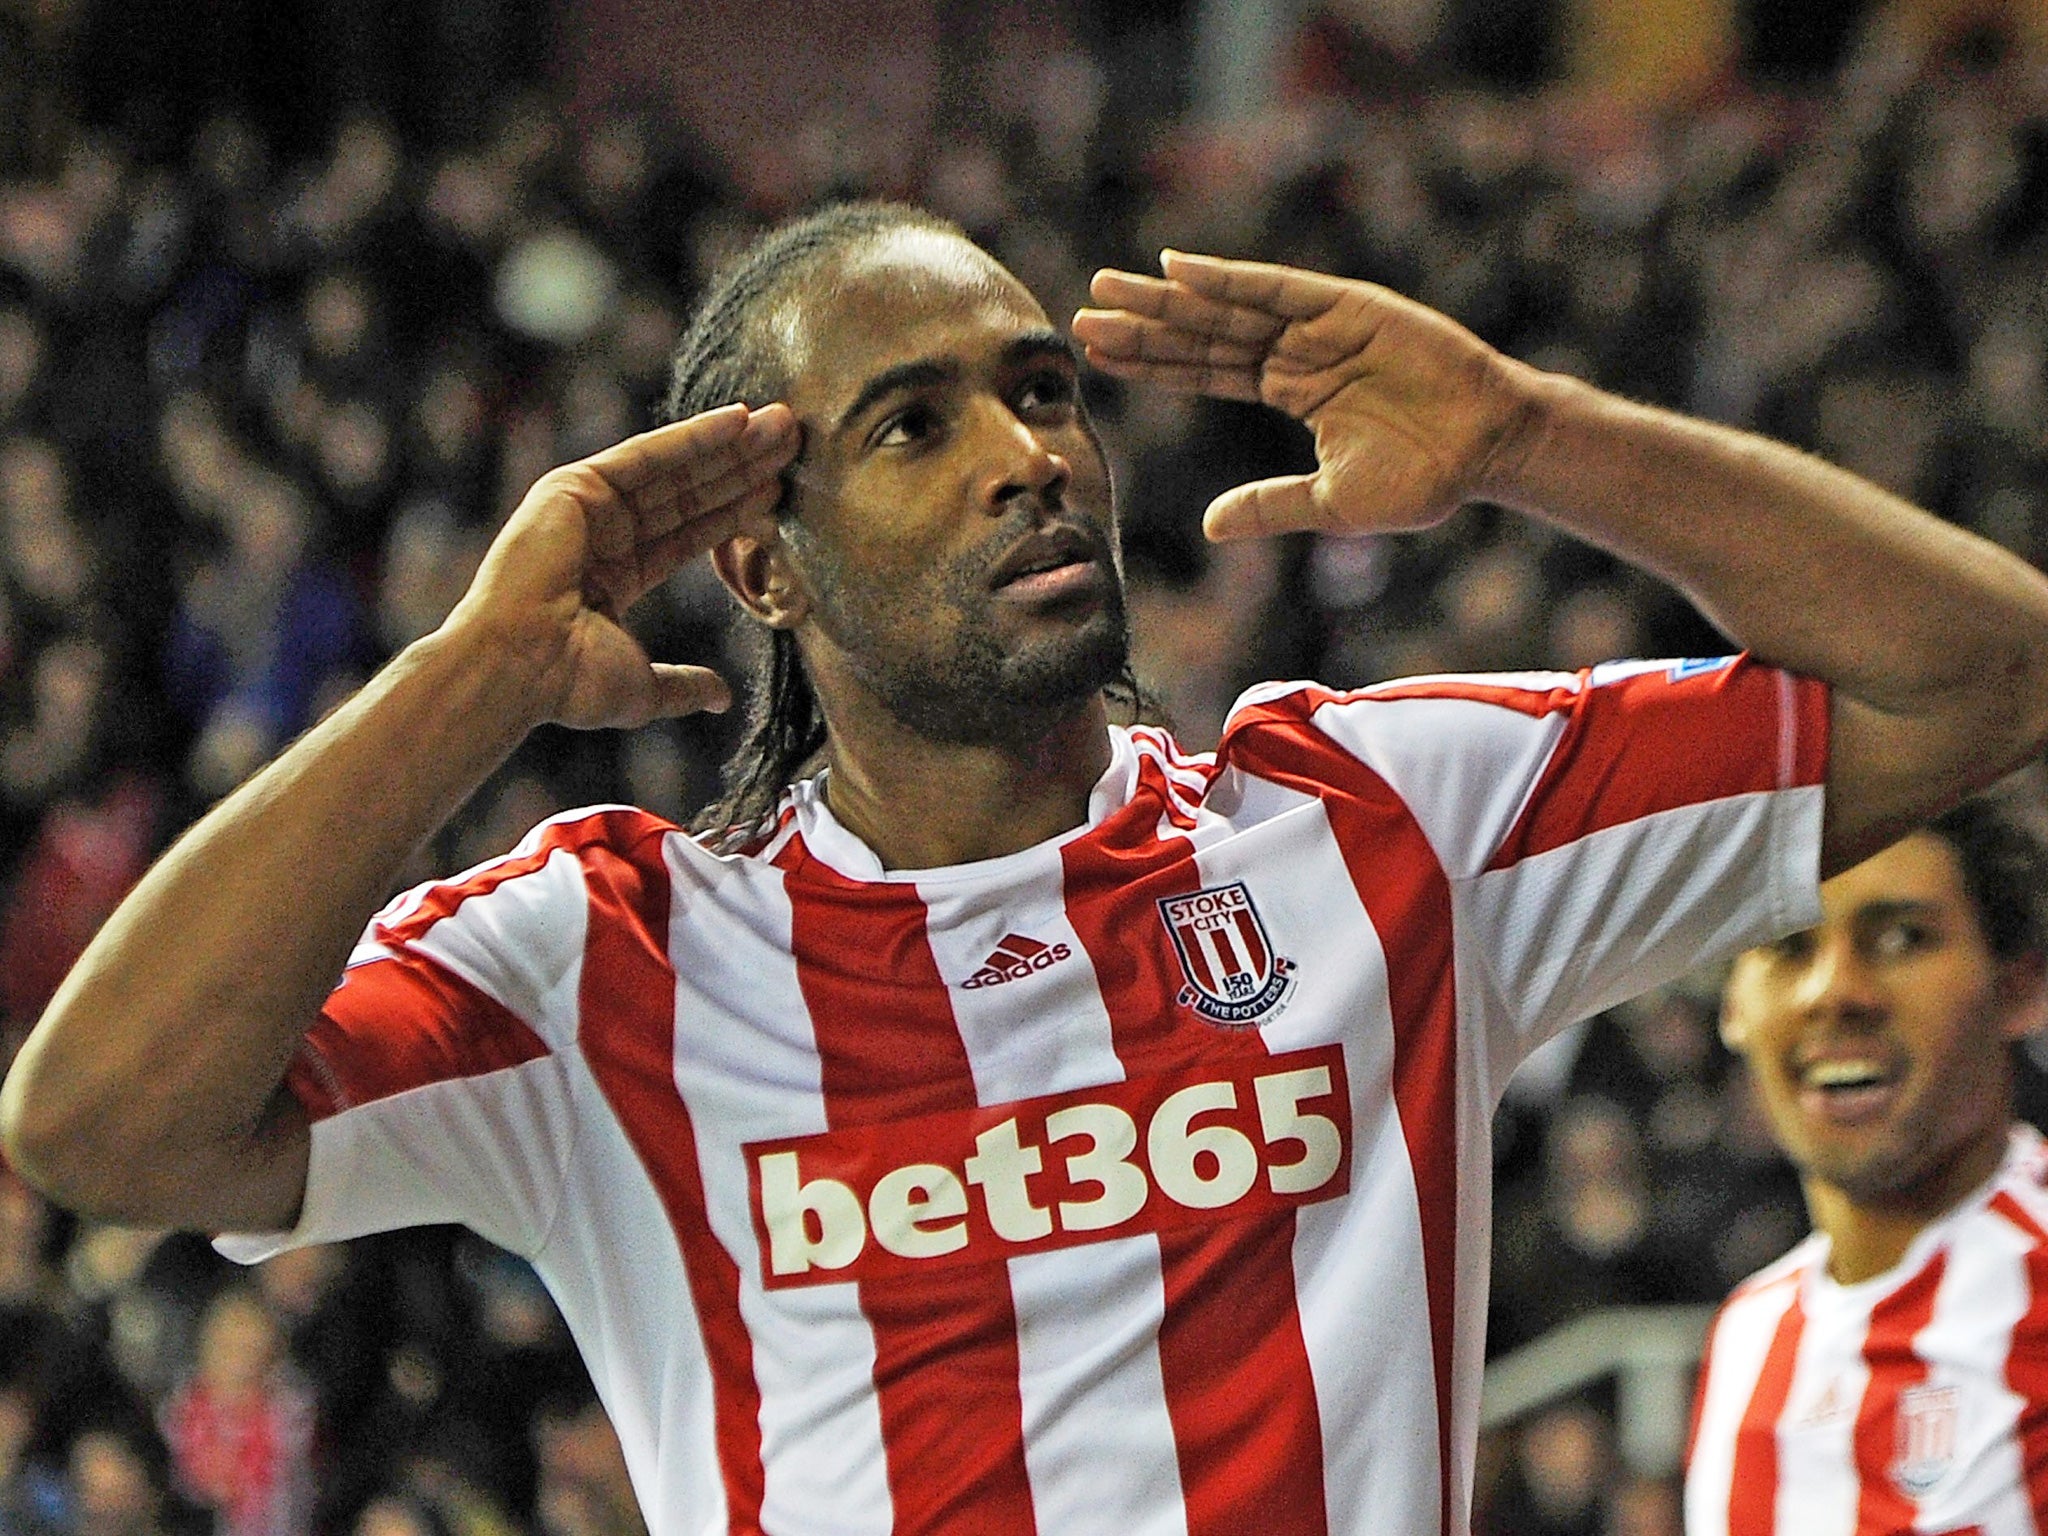 Cameron Jerome is willing to put aside personal disappointment if his coming off the bench helps Stoke City complete an unbeaten year at the Britannia Stadium